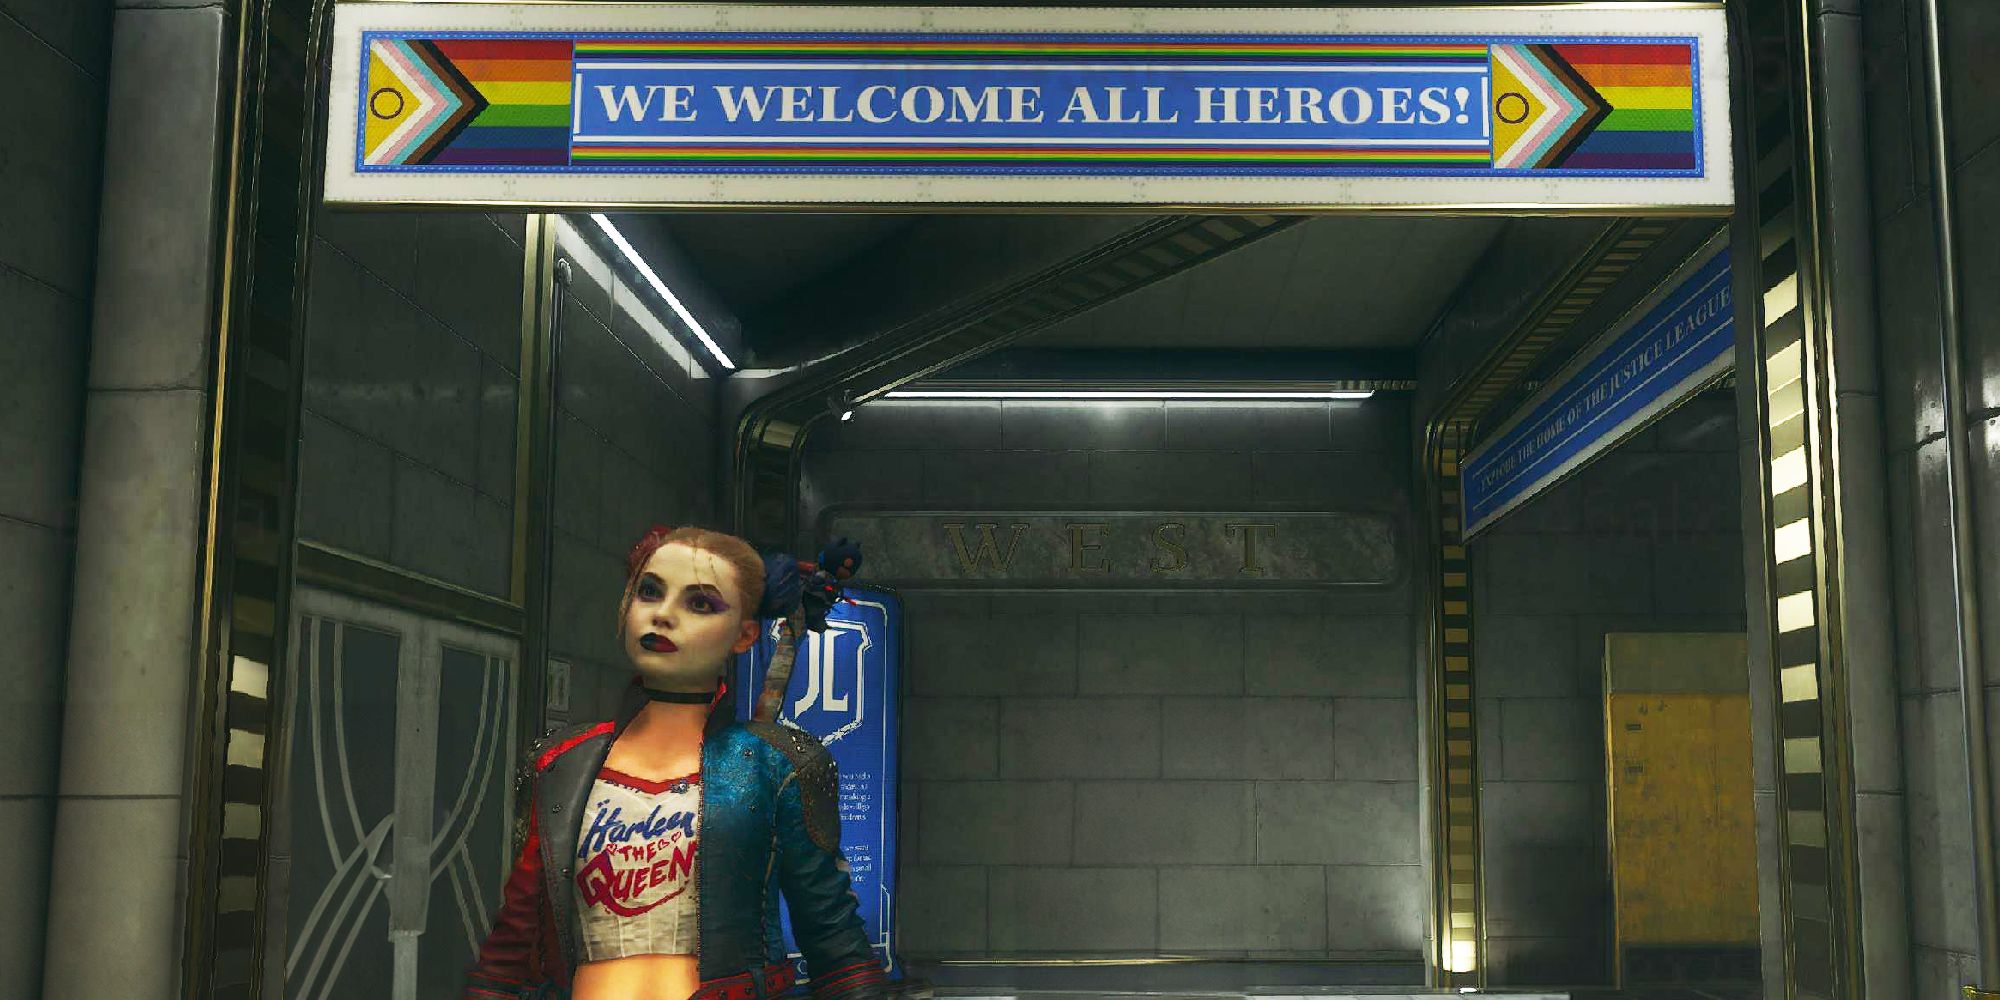 Suicide Squad Kill The Justice League Harley walking through the Justice Hall with a sign adorned by LGBT flags above saying We Welcome All Heroes